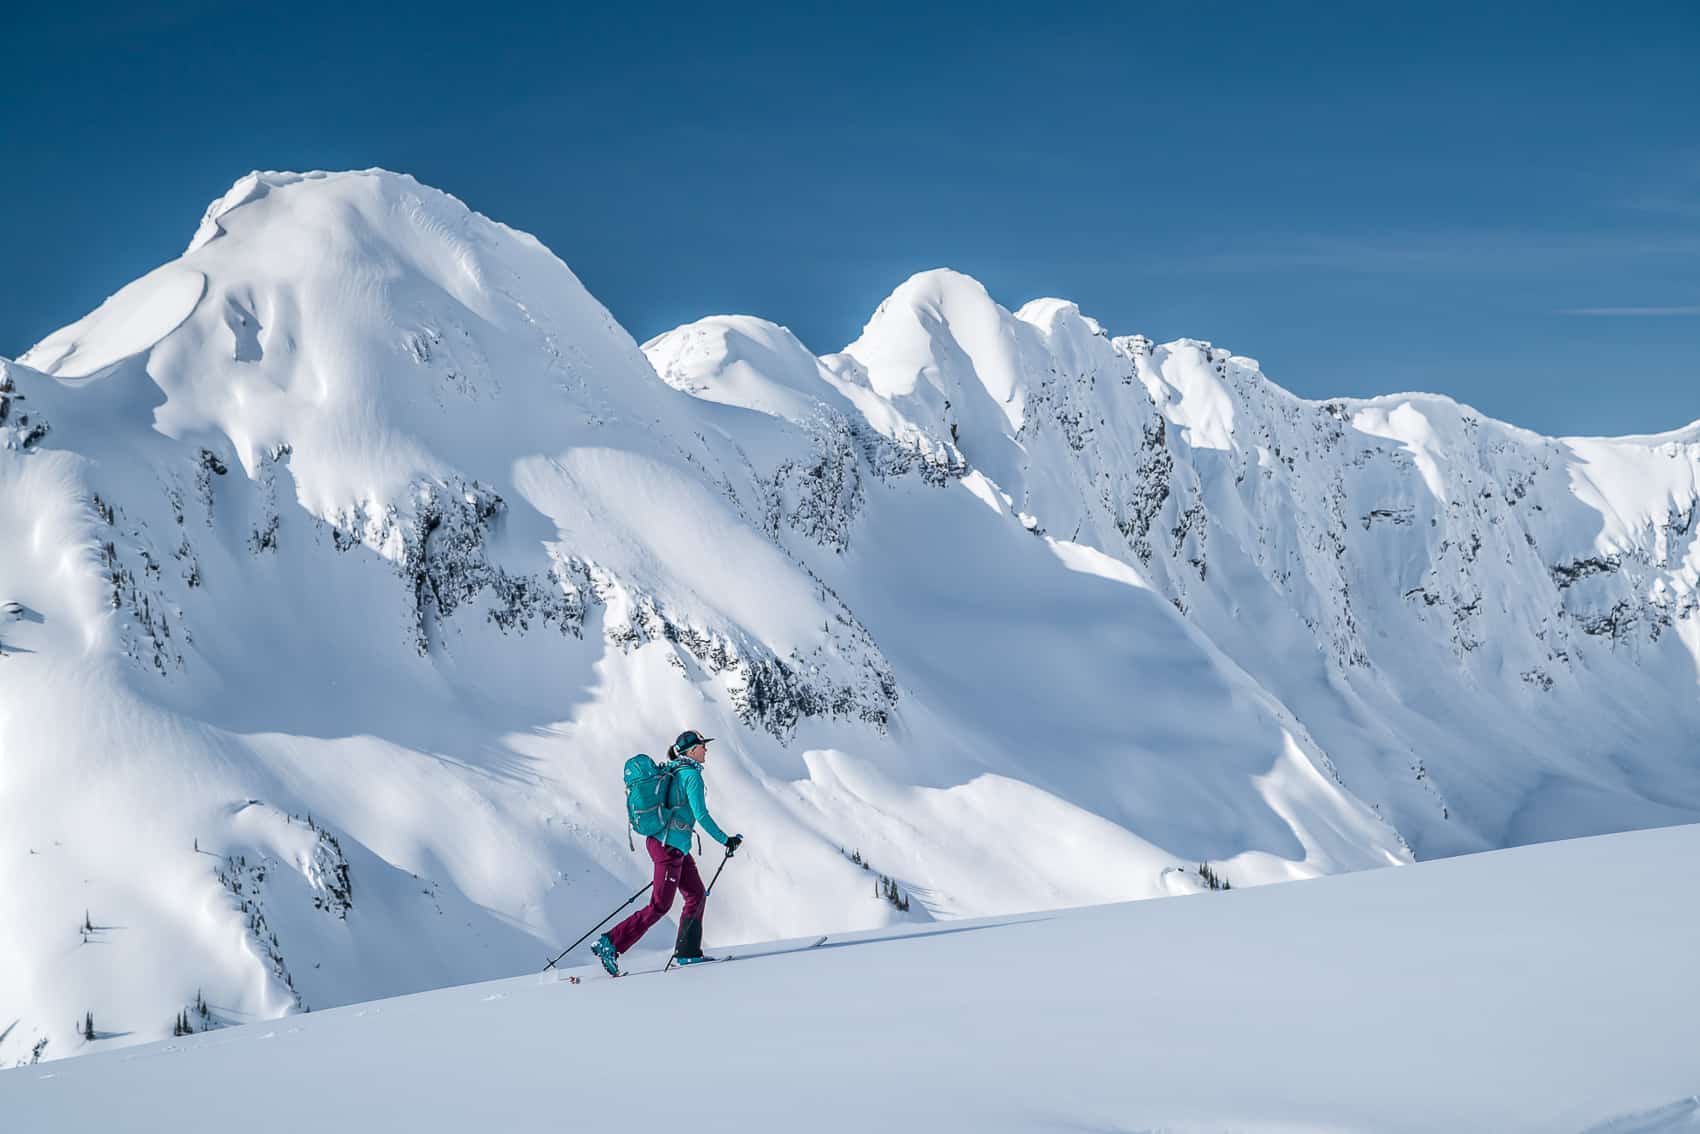 Backcountry Touring Woman ski touring in Rogers Pass